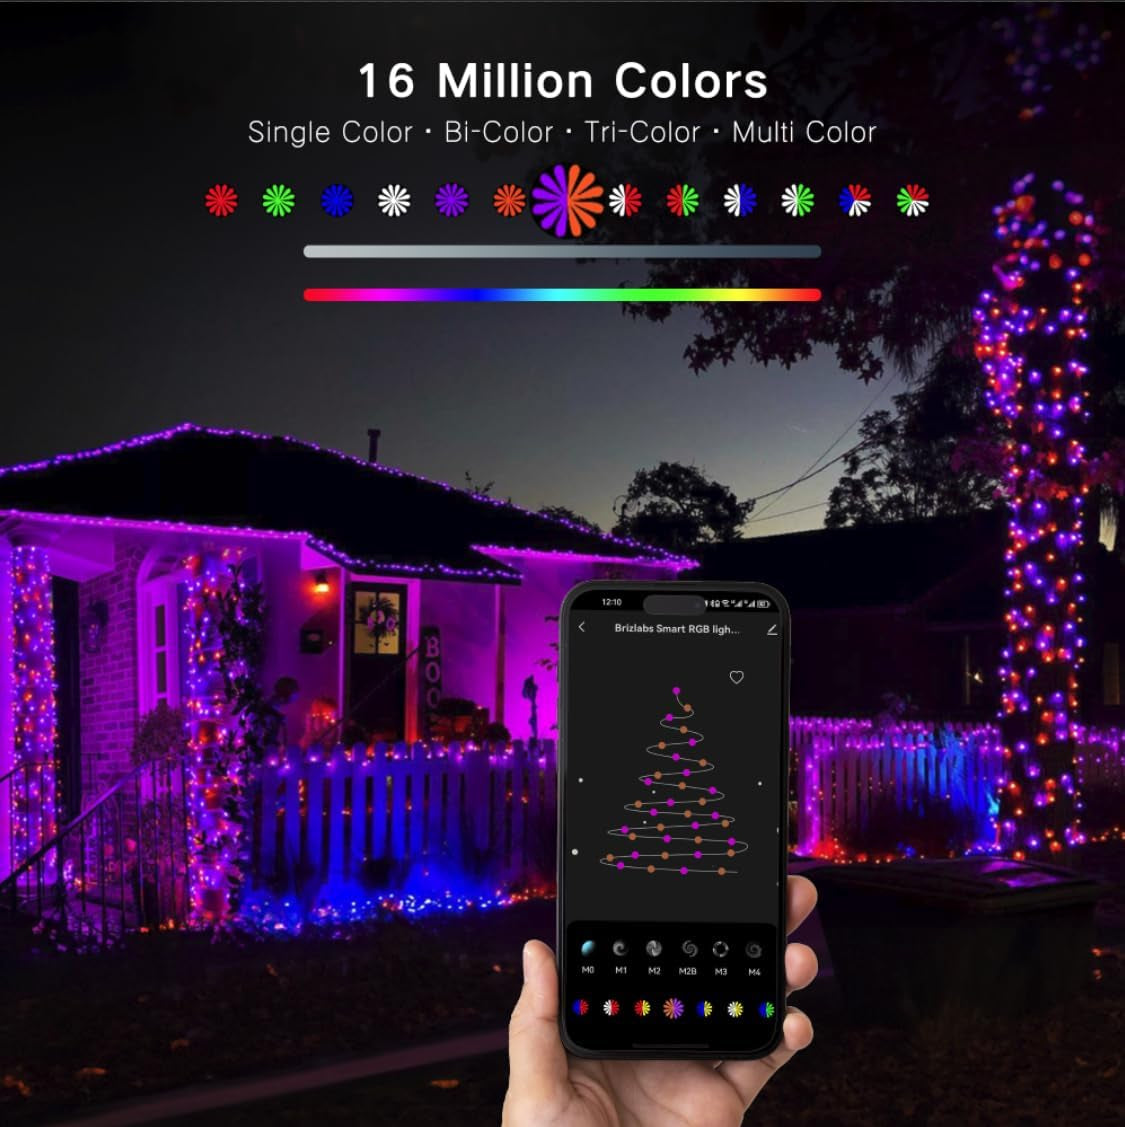 Brizled Smart Wifi Christmas Lights, 99Ft 300 LED Smart Color Changing Christmas Lights APP Control, RGB Xmas Tree Lights Work with Alexa Google Home for Christmas Halloween Indoor Outdoor Party Decor